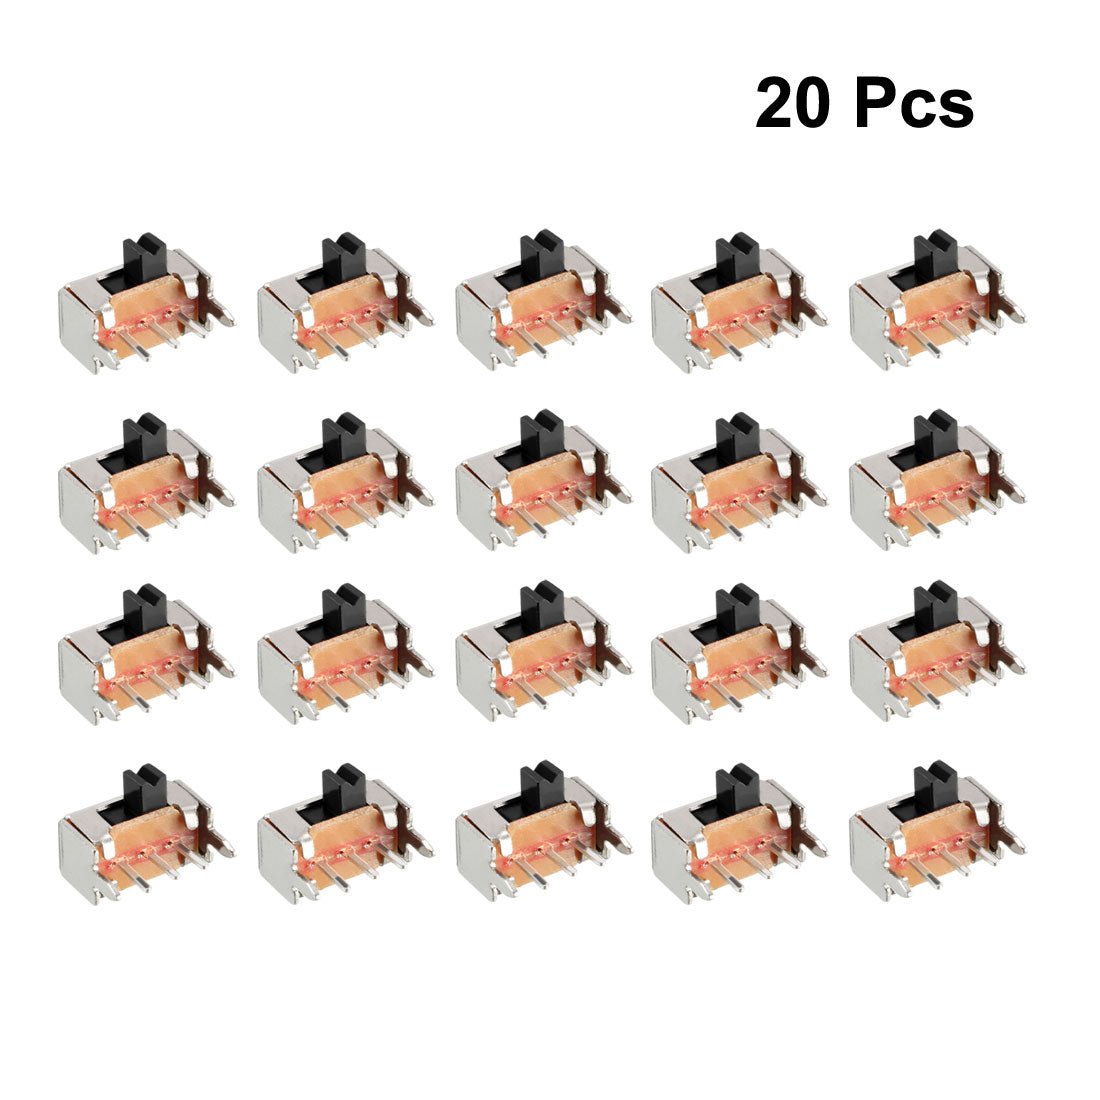 uxcell Uxcell 20Pcs 2mm Horizontal Slide Switch SPDT 1P2T 3 Terminals PCB Panel Latching